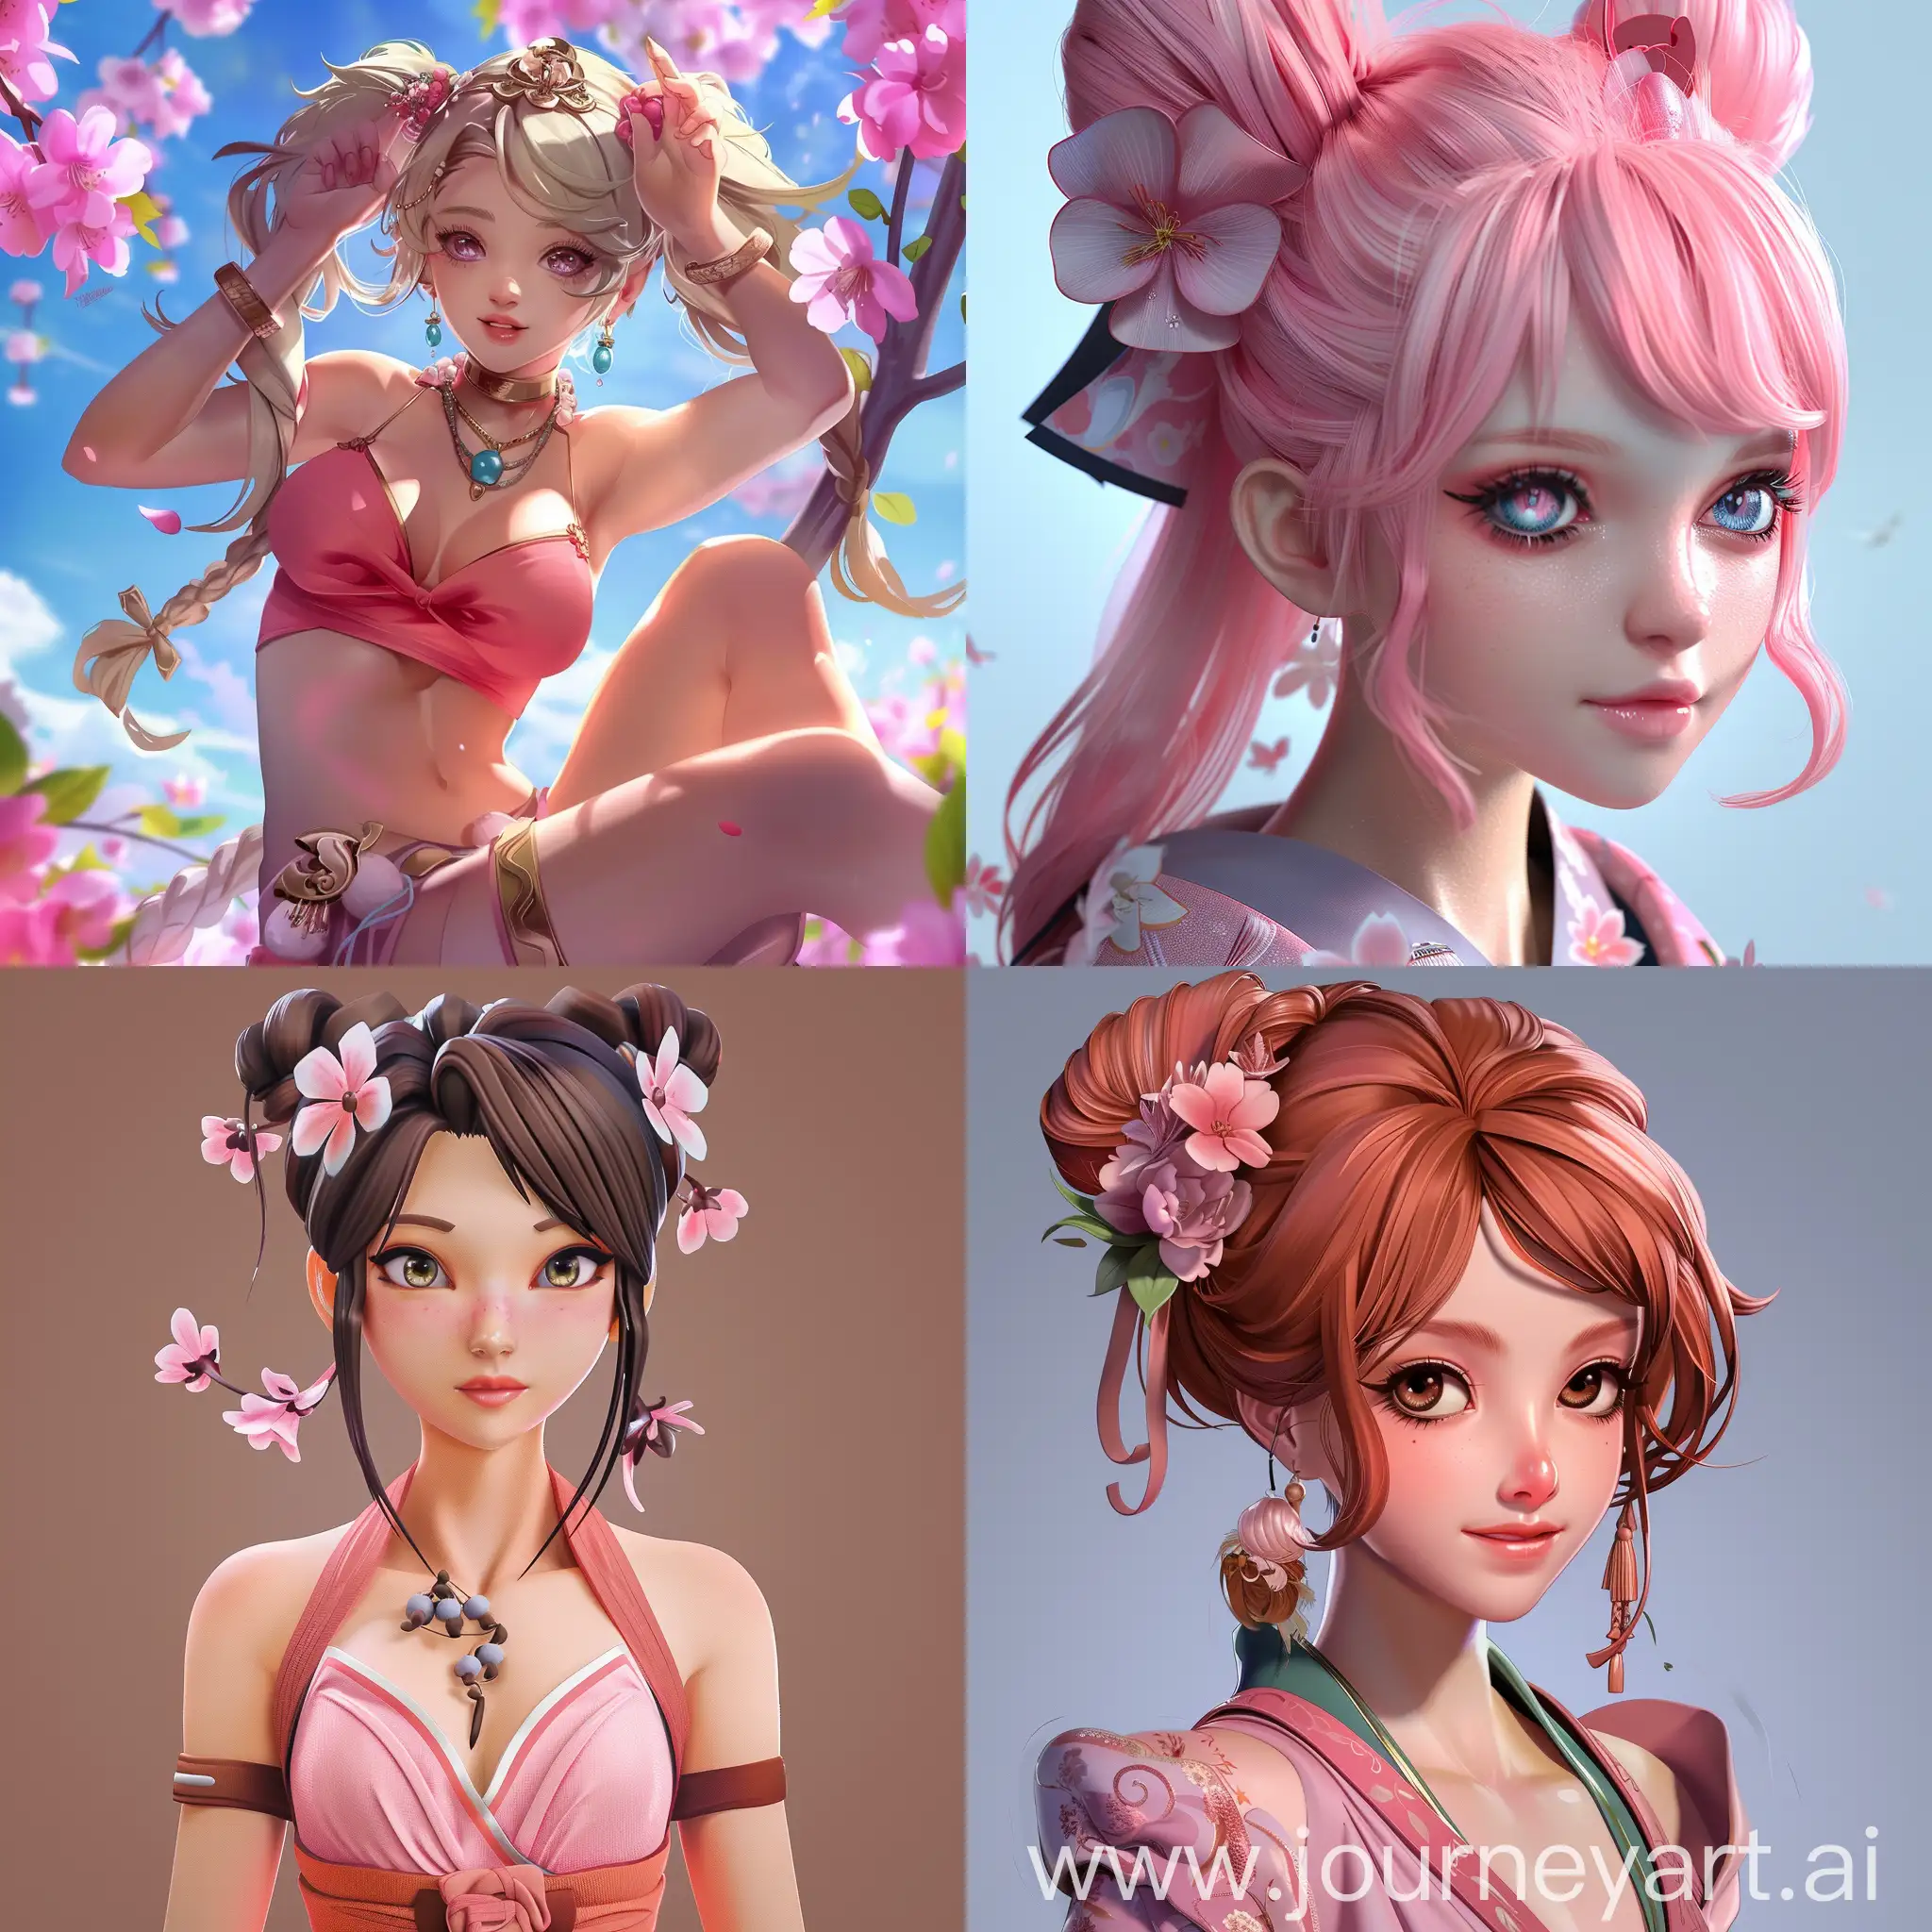 Blossom-Chillin-in-Another-World-with-Level-2-Super-Cheat-Powers-Realistic-Art